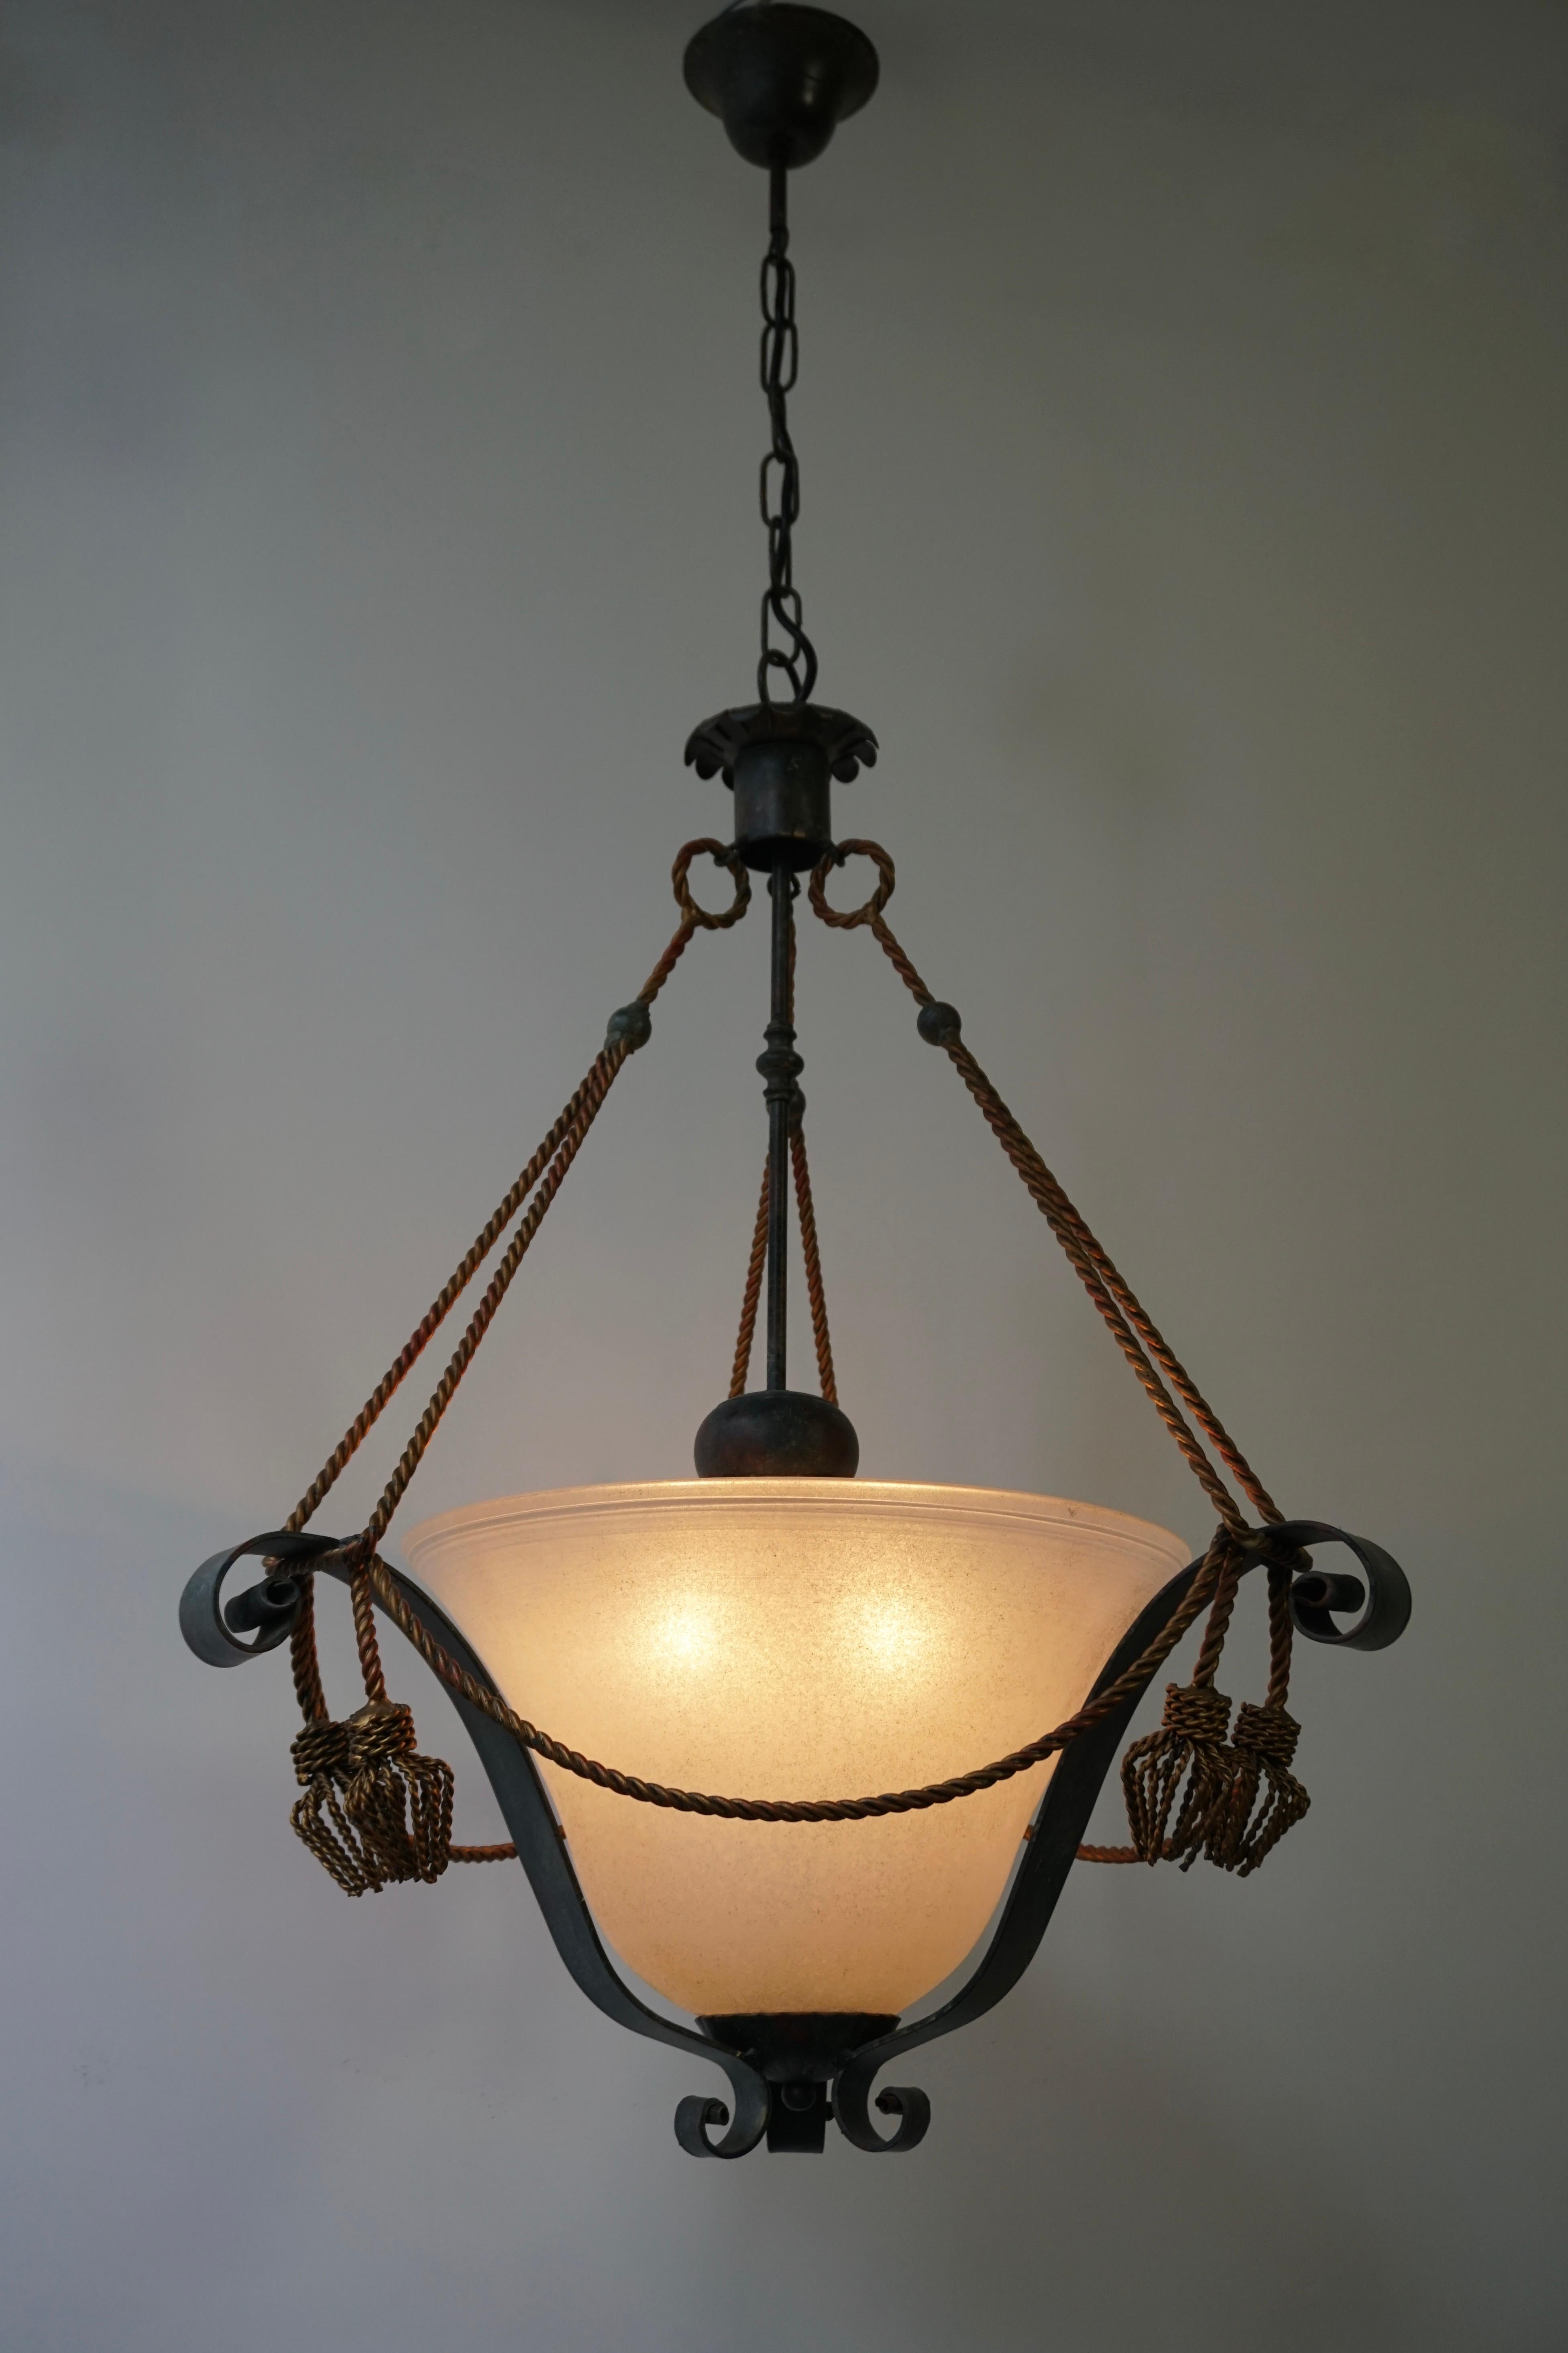 Italian pendant light in glass and metal.
Diameter 53 cm.
Height fixture 70 cm.
Total height with chain 110 cm.